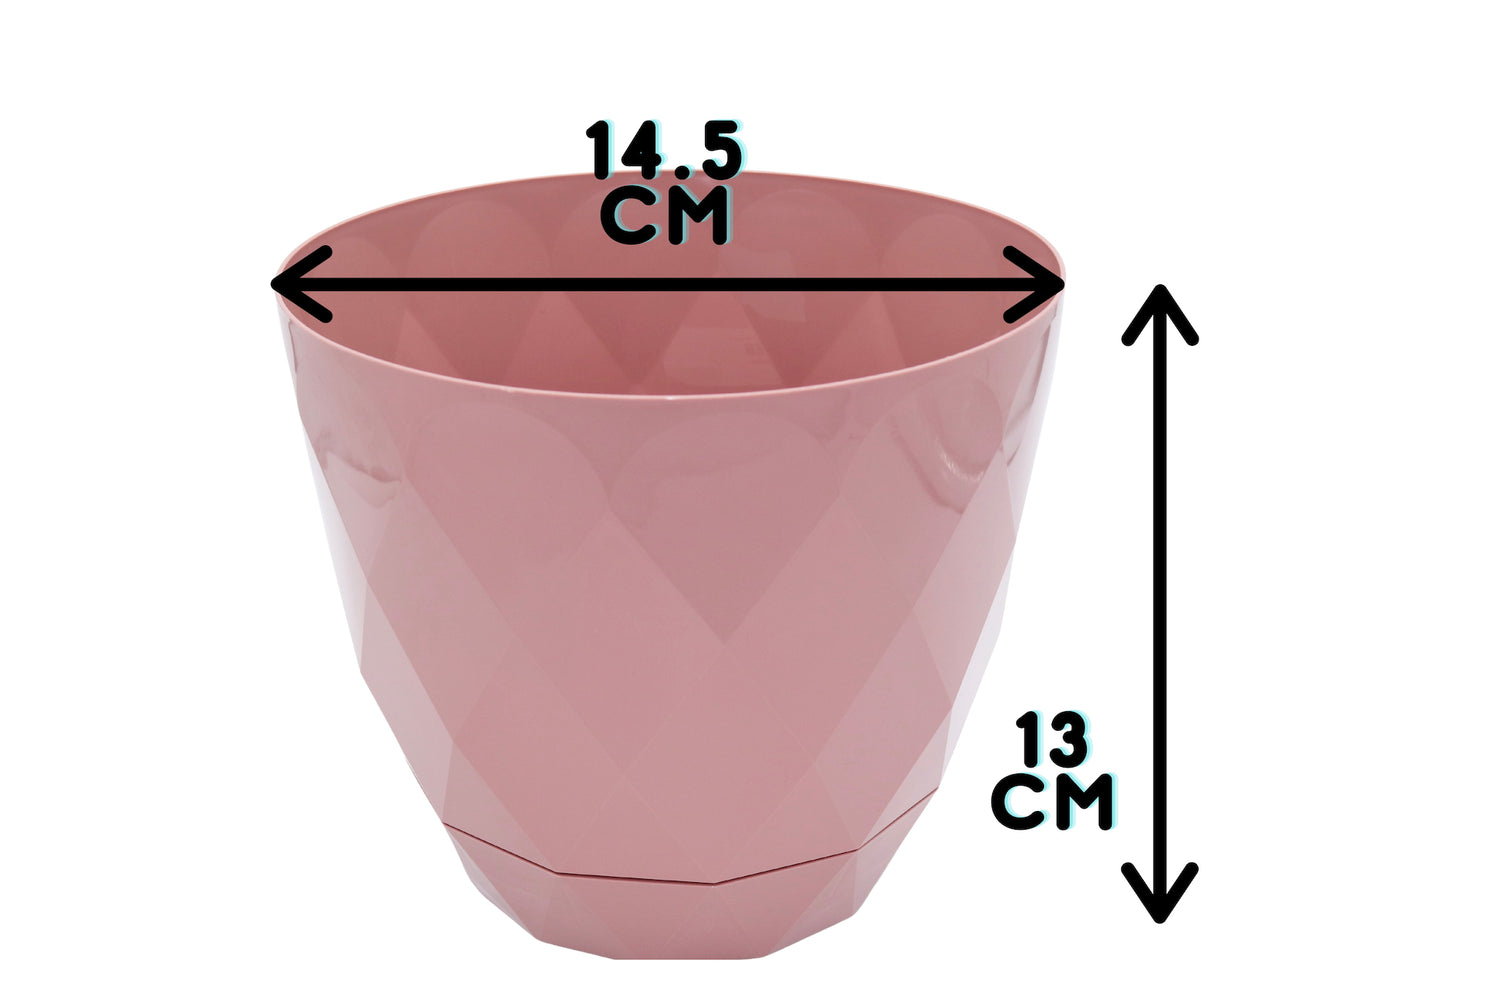 dimensions of self watering 14.5cm plant pot